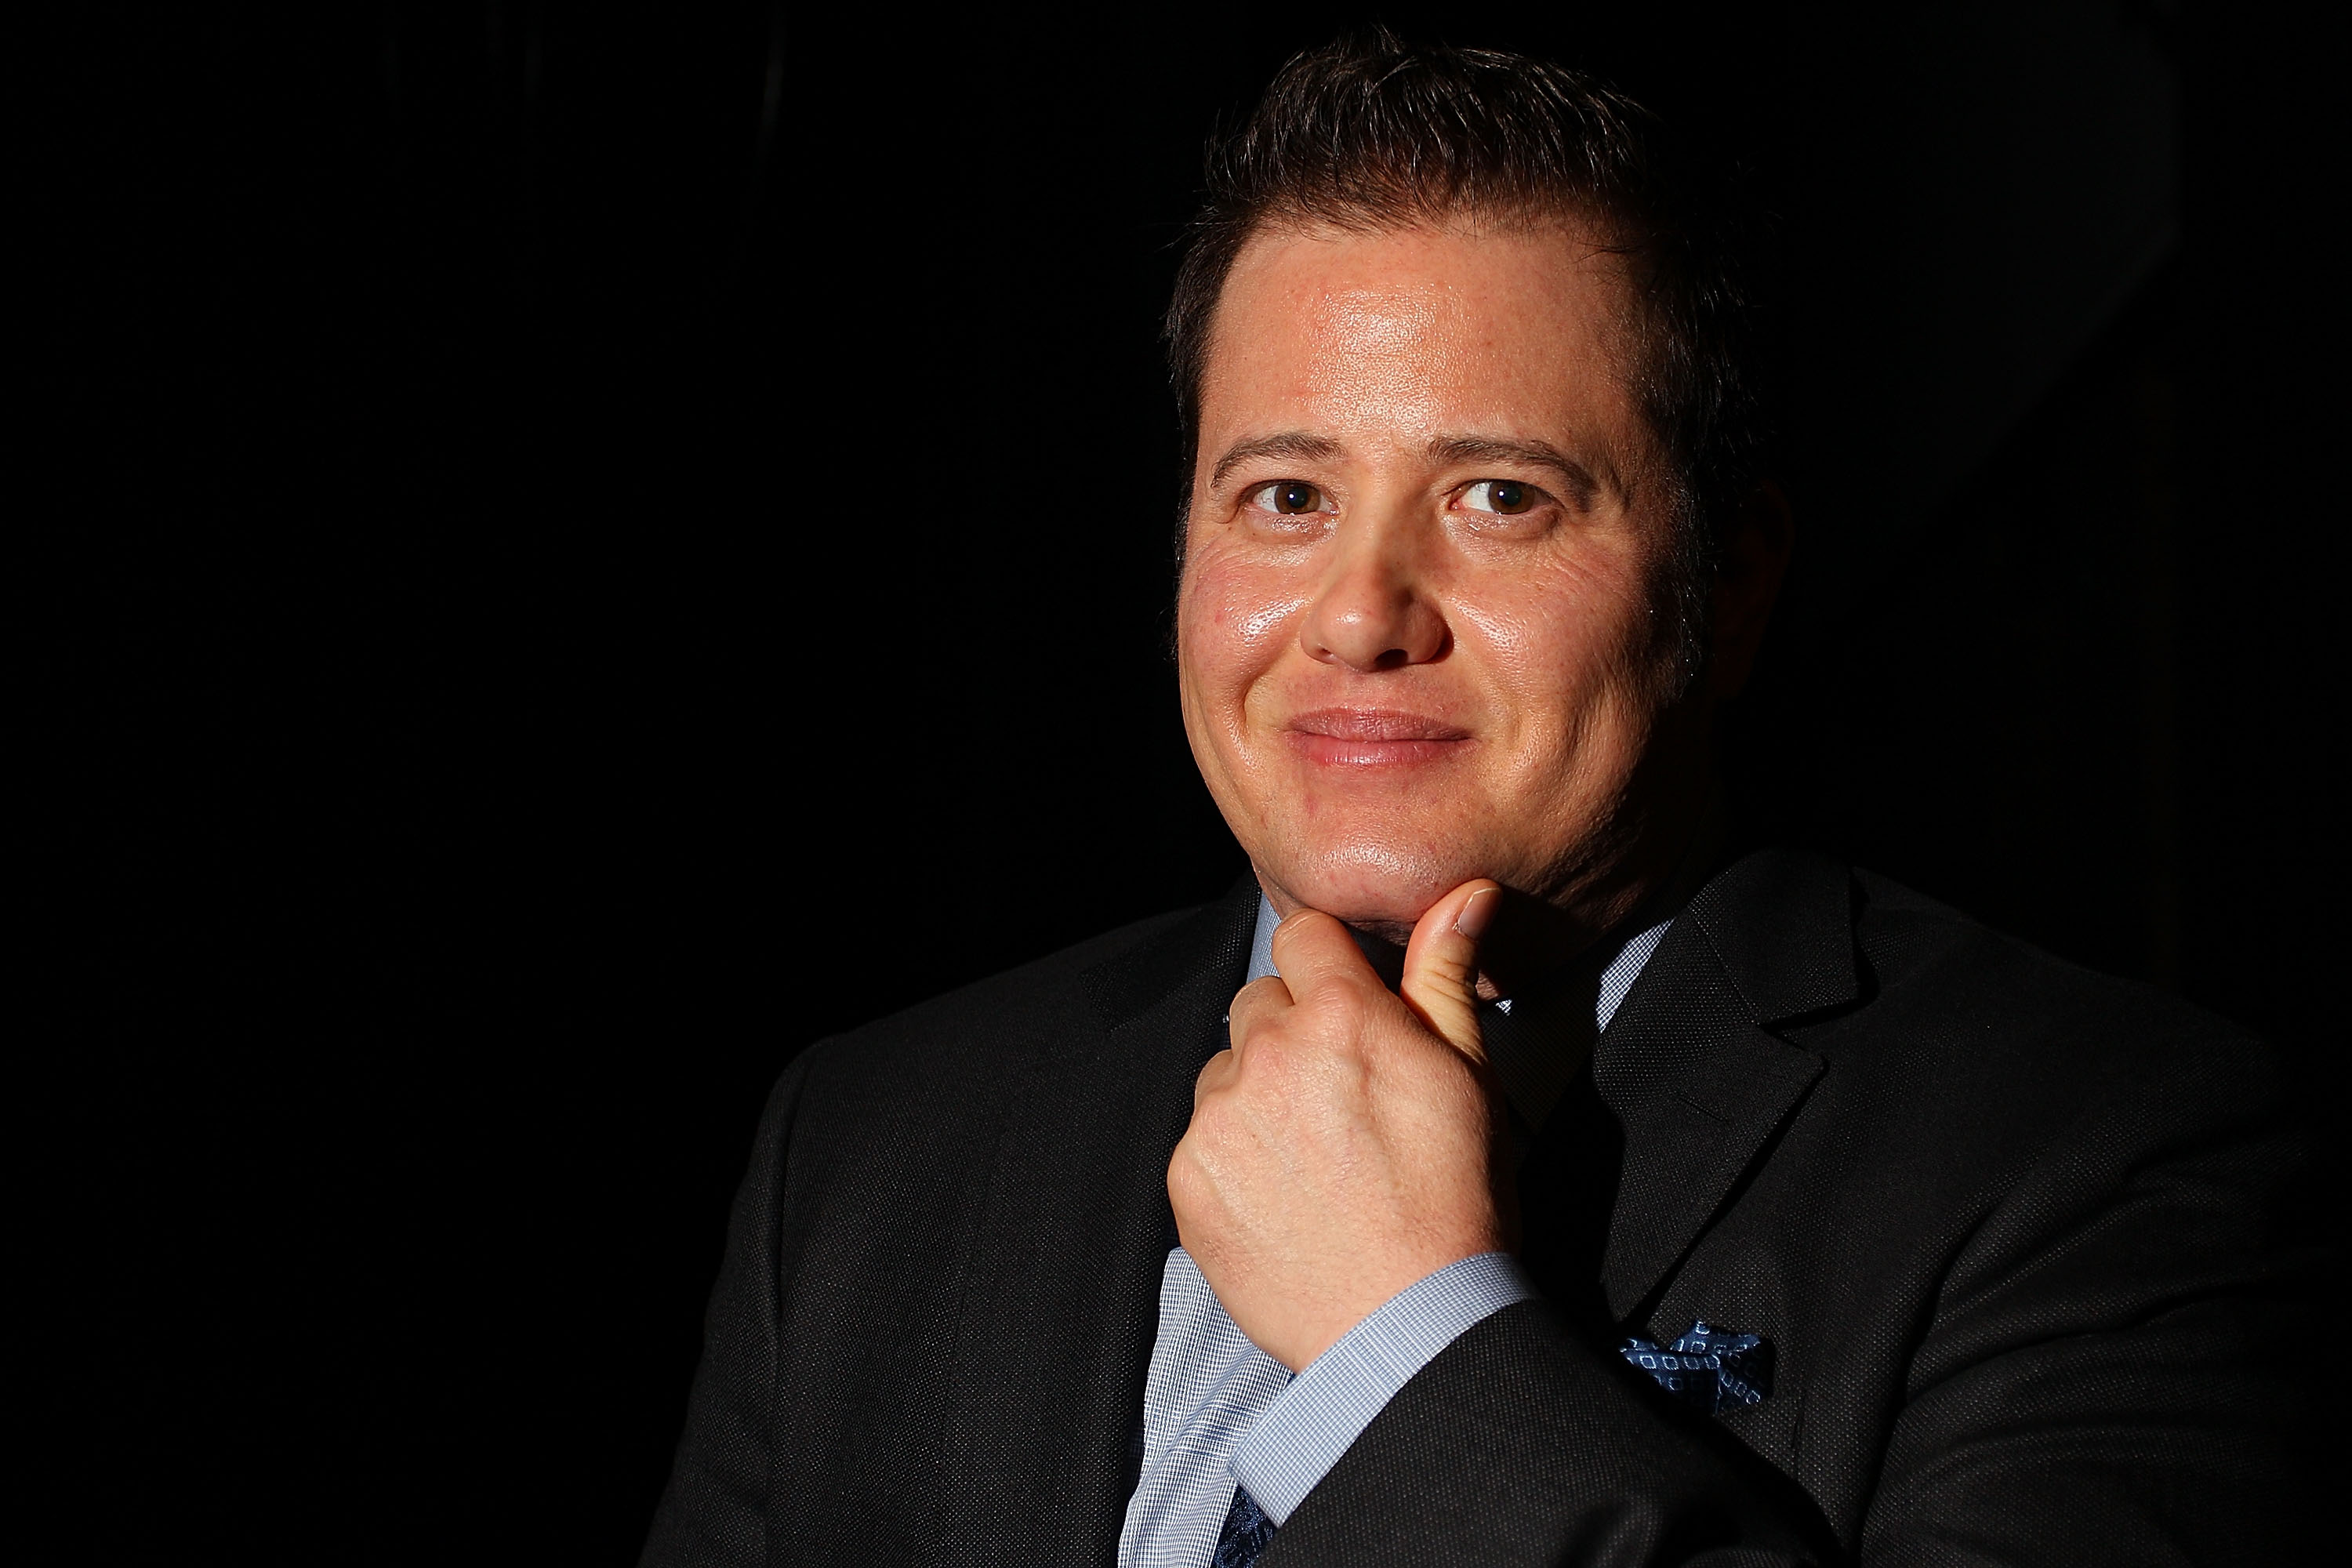 Chaz Bono backstage at the Sydney Gay & Lesbian Mardi Gras in Australia on February 26, 2014. | Source: Getty Images